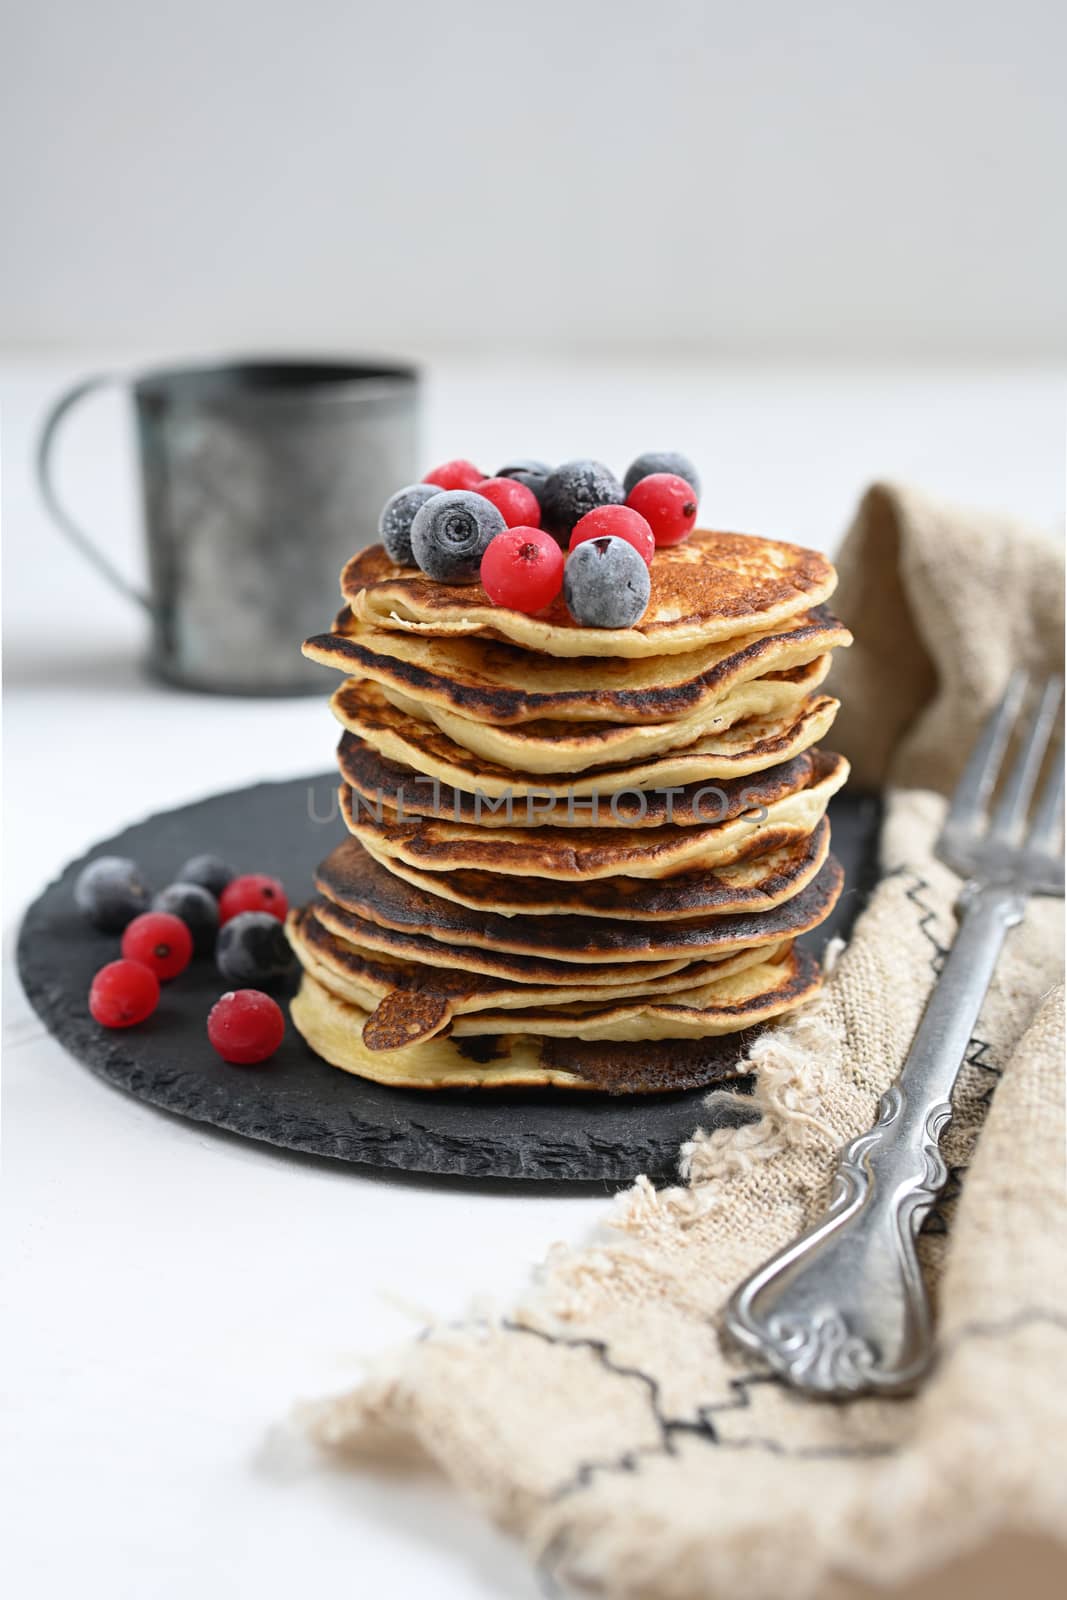 Plate with pancakes and berries on white table by sashokddt